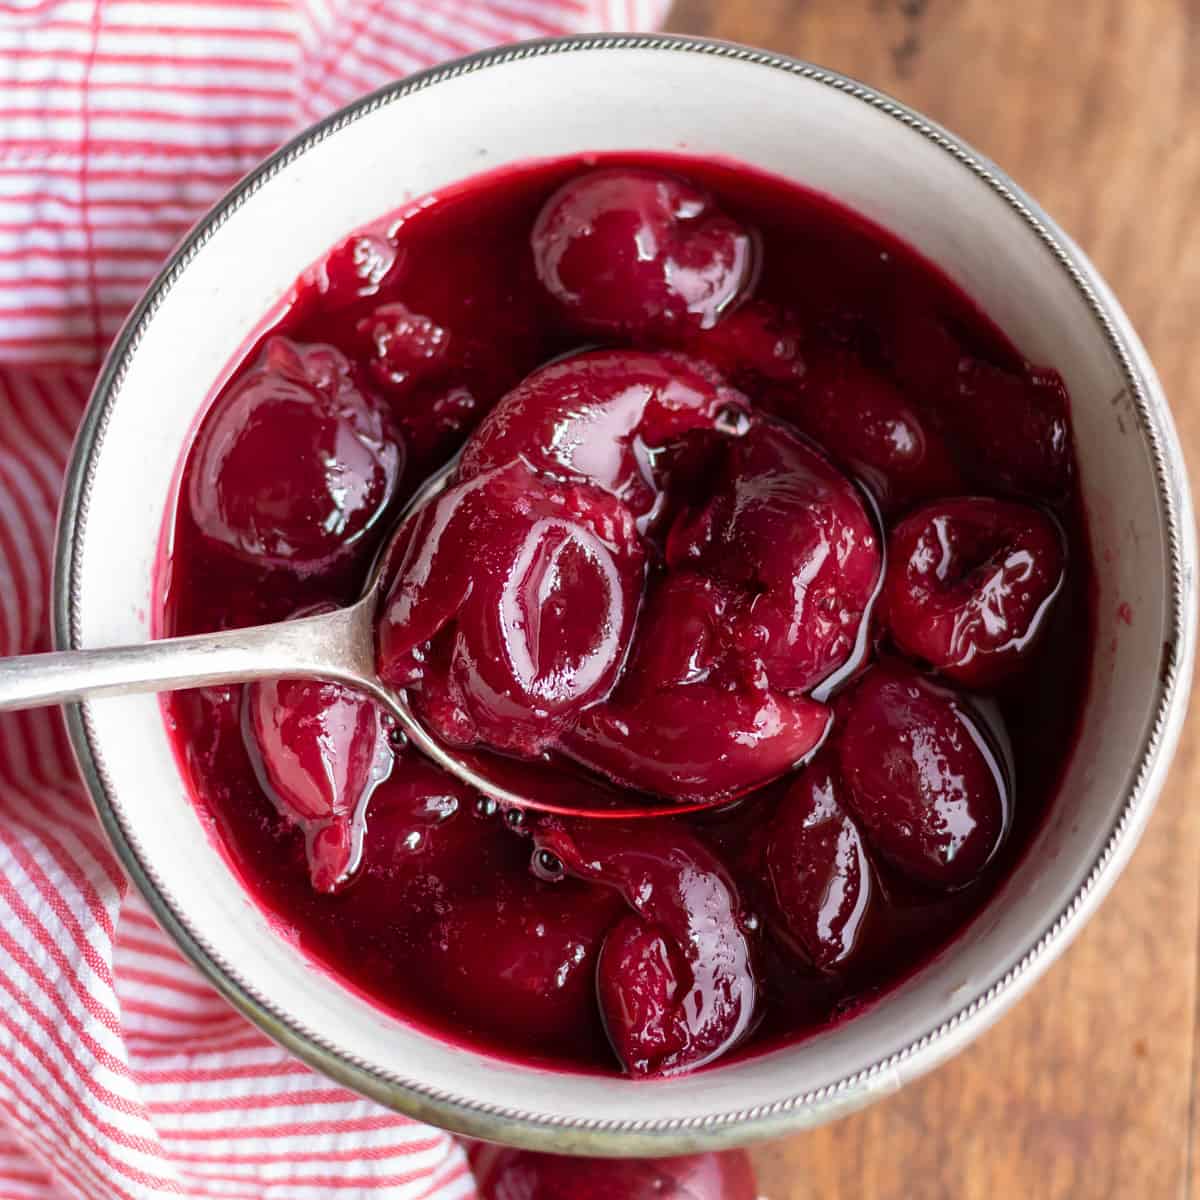 Dish of compote with a spoon.